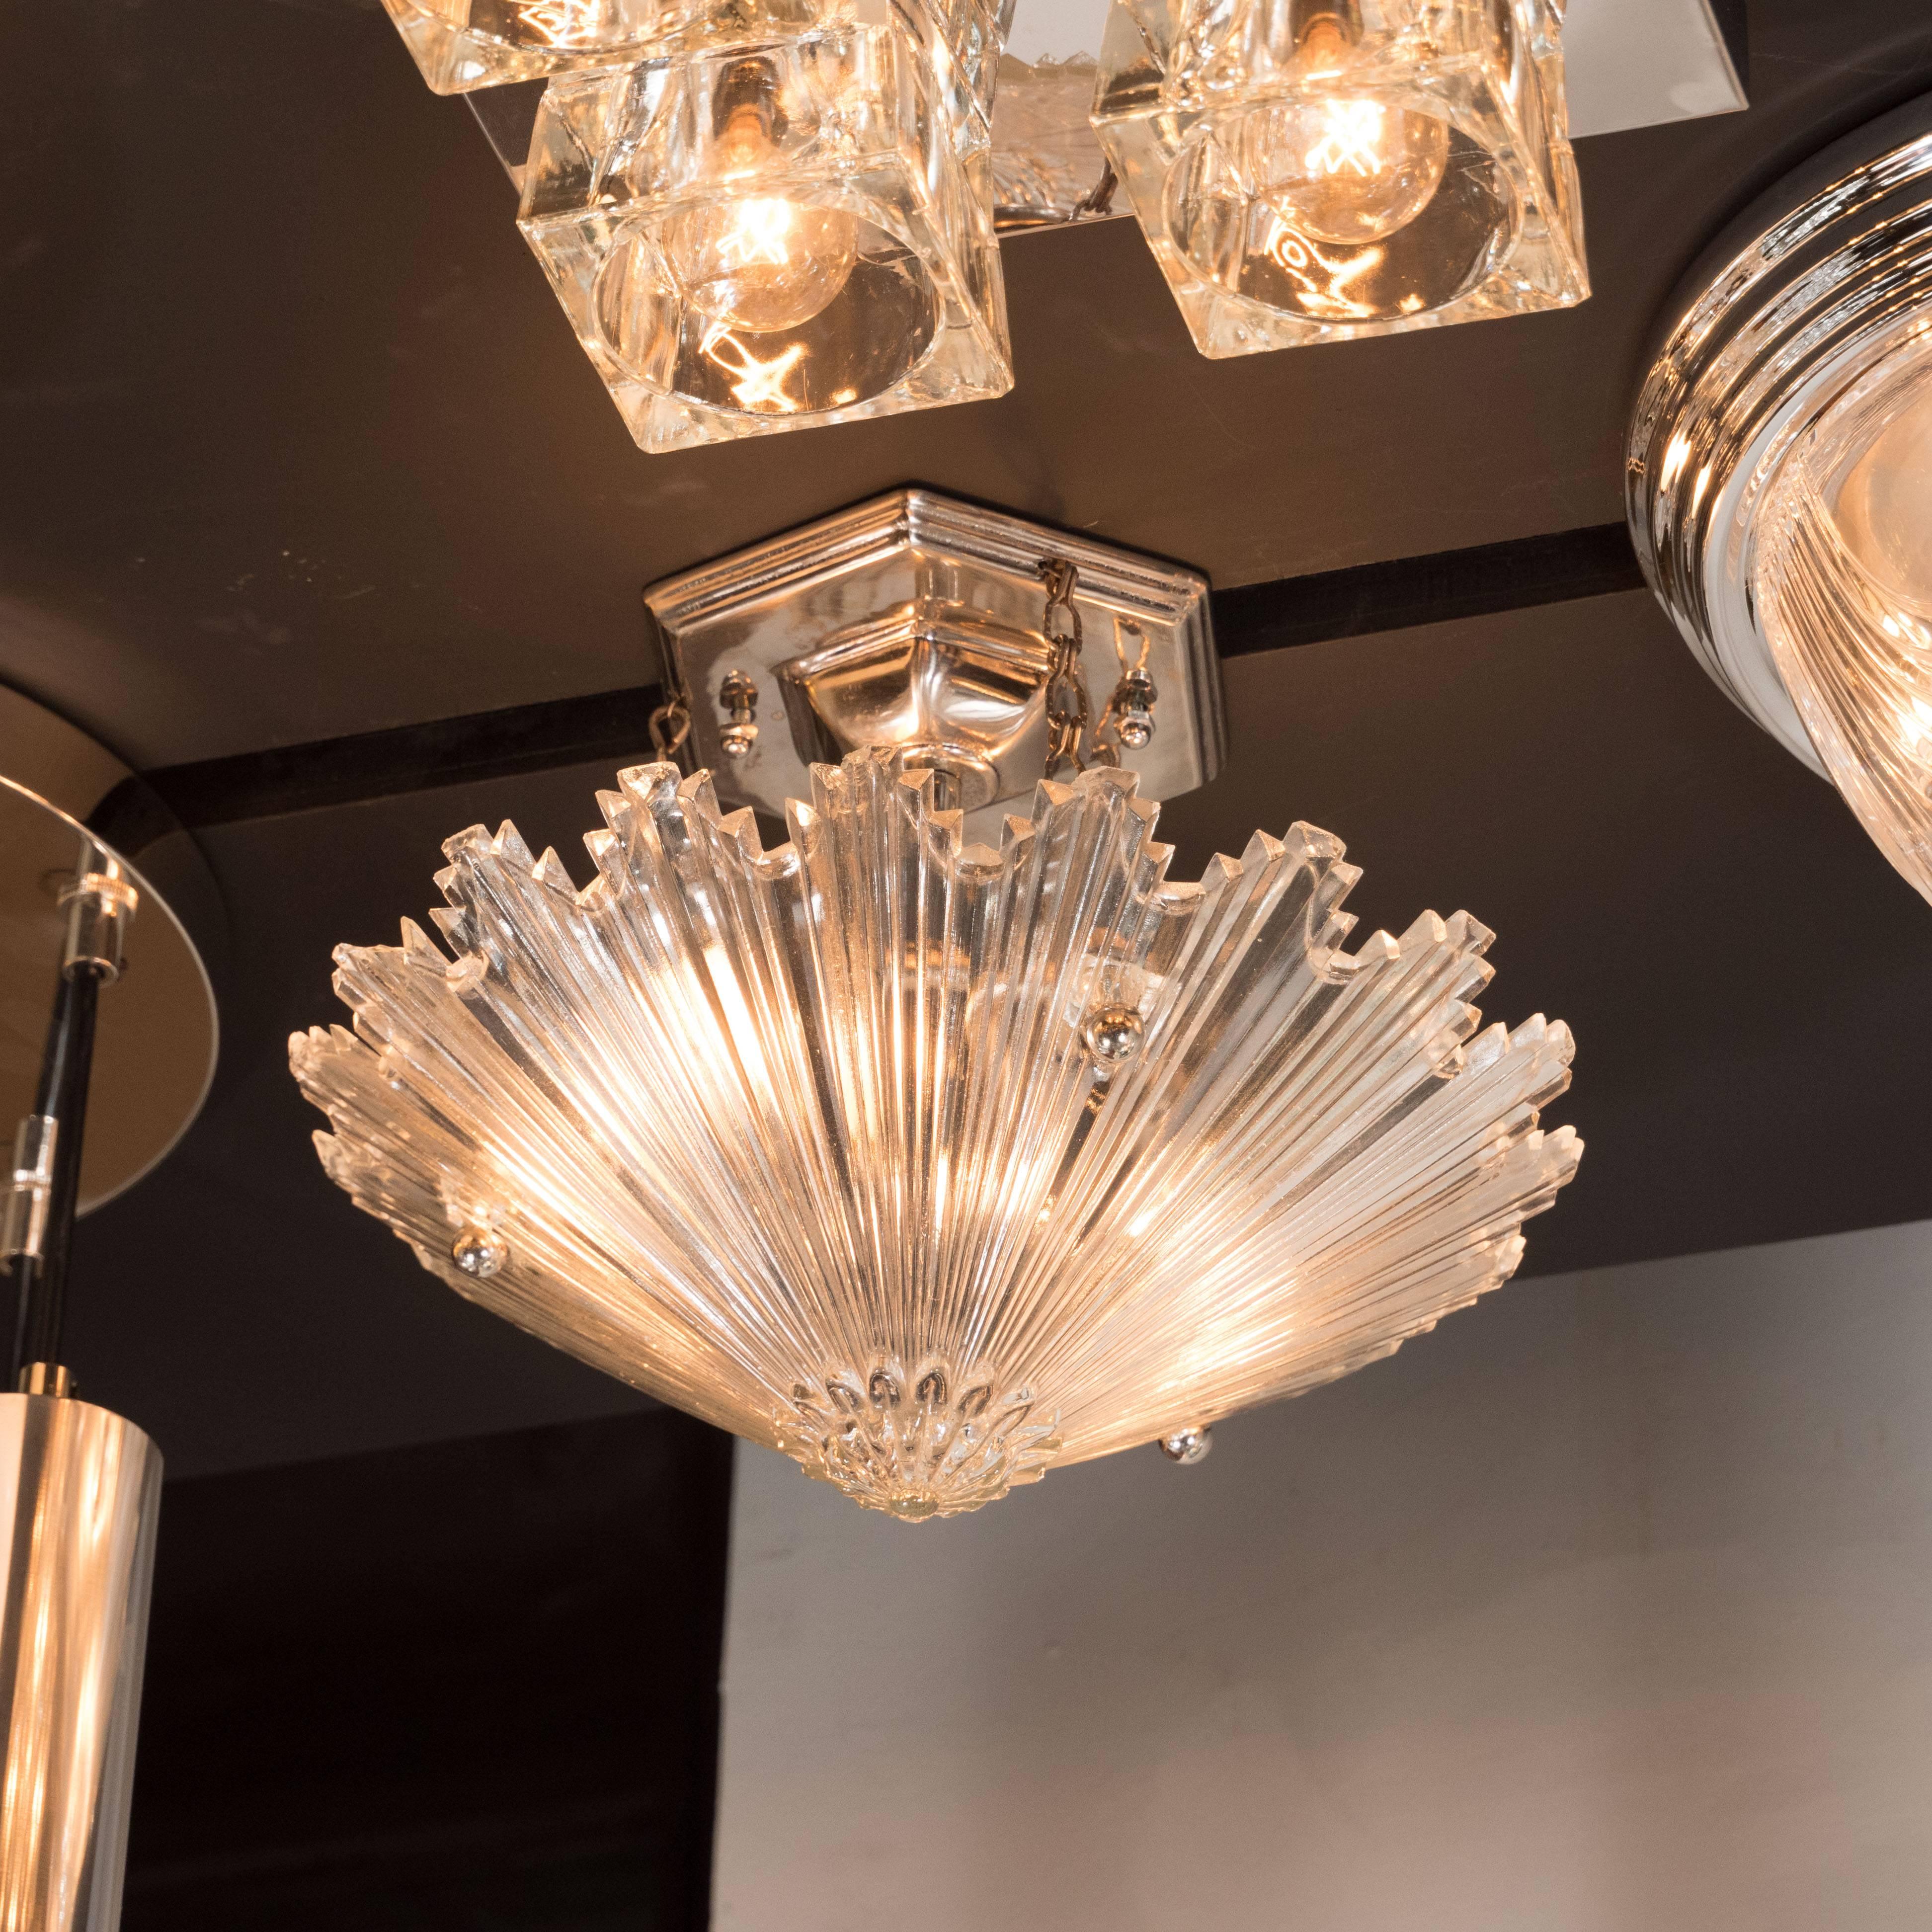 This stunning chandelier, realized in the United States circa 1935, represents America Deco Style at its finest. It offers a sunburst explosion of striated rays emanating from a round finial surrounded by petal-like embellishments. The staggered